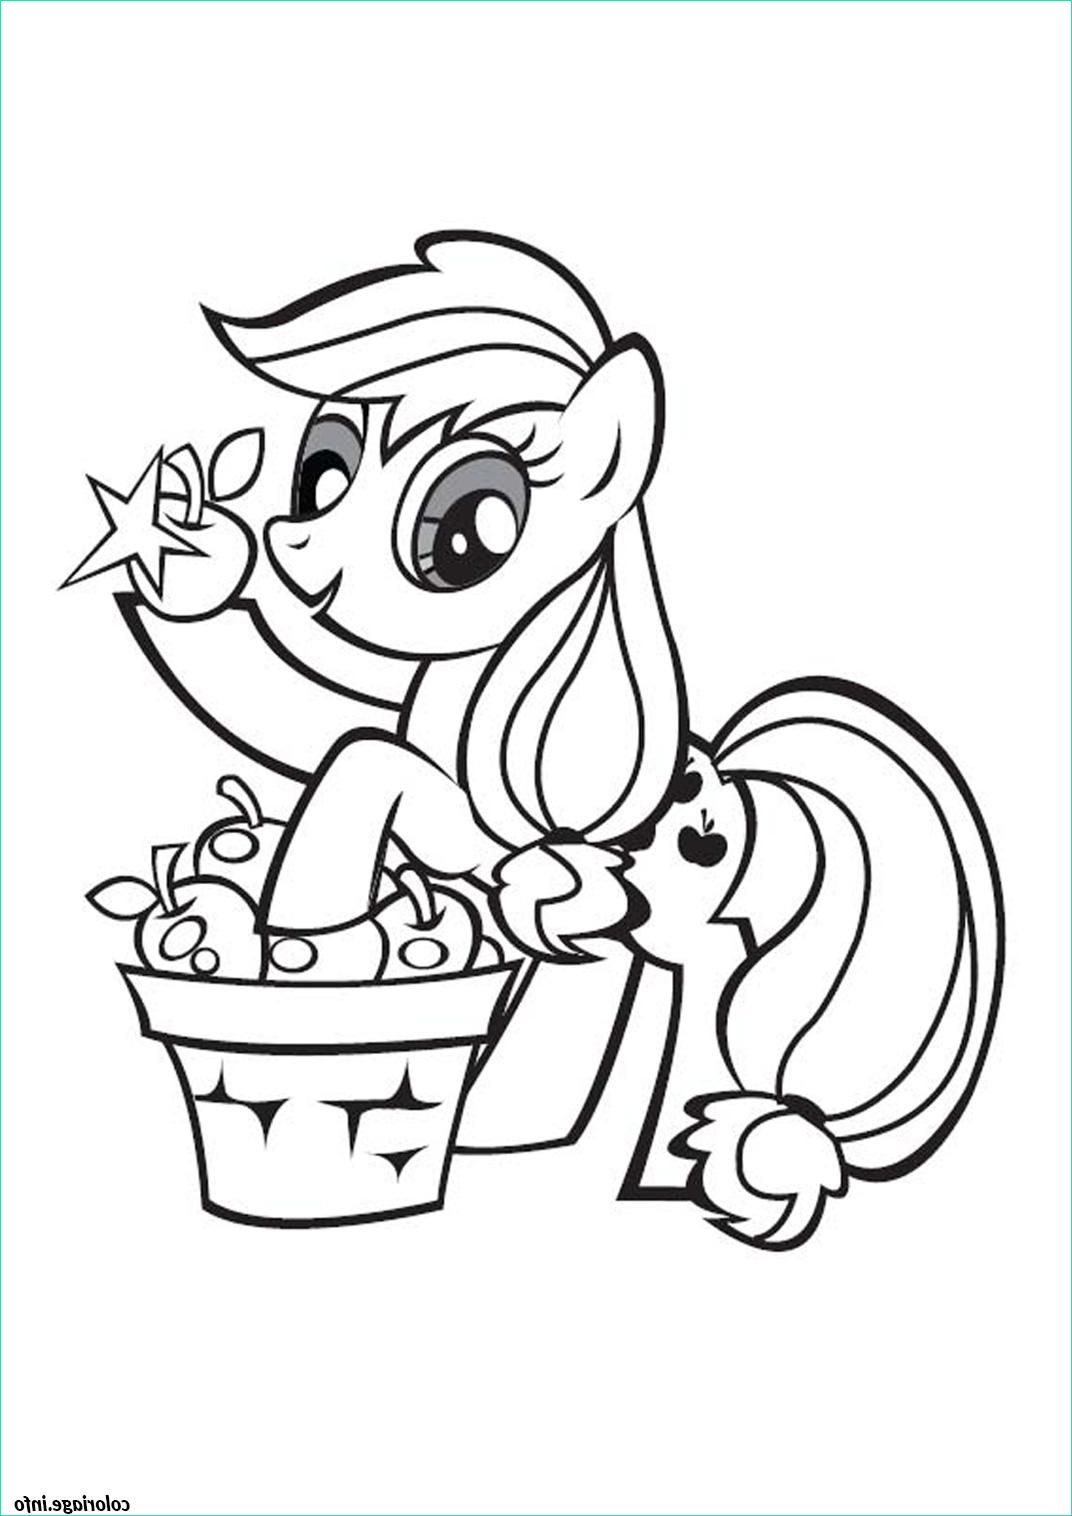 Coloriage My Little Poney Impressionnant Images Coloriage My Little Poney 9 Dessin